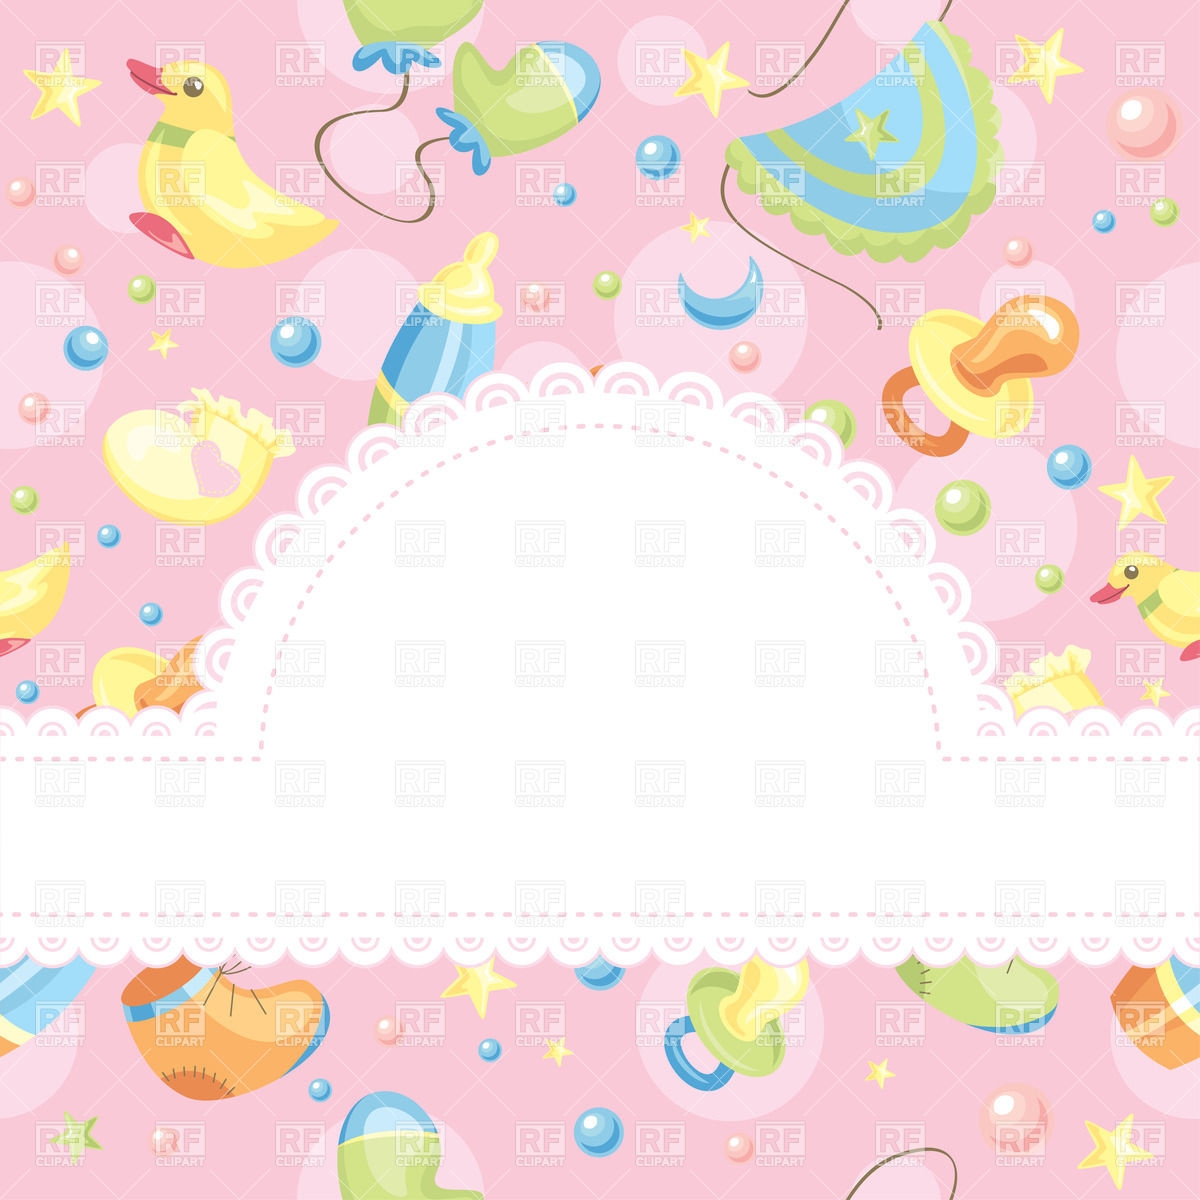 Baby Clipart Background   clipartsgramcom